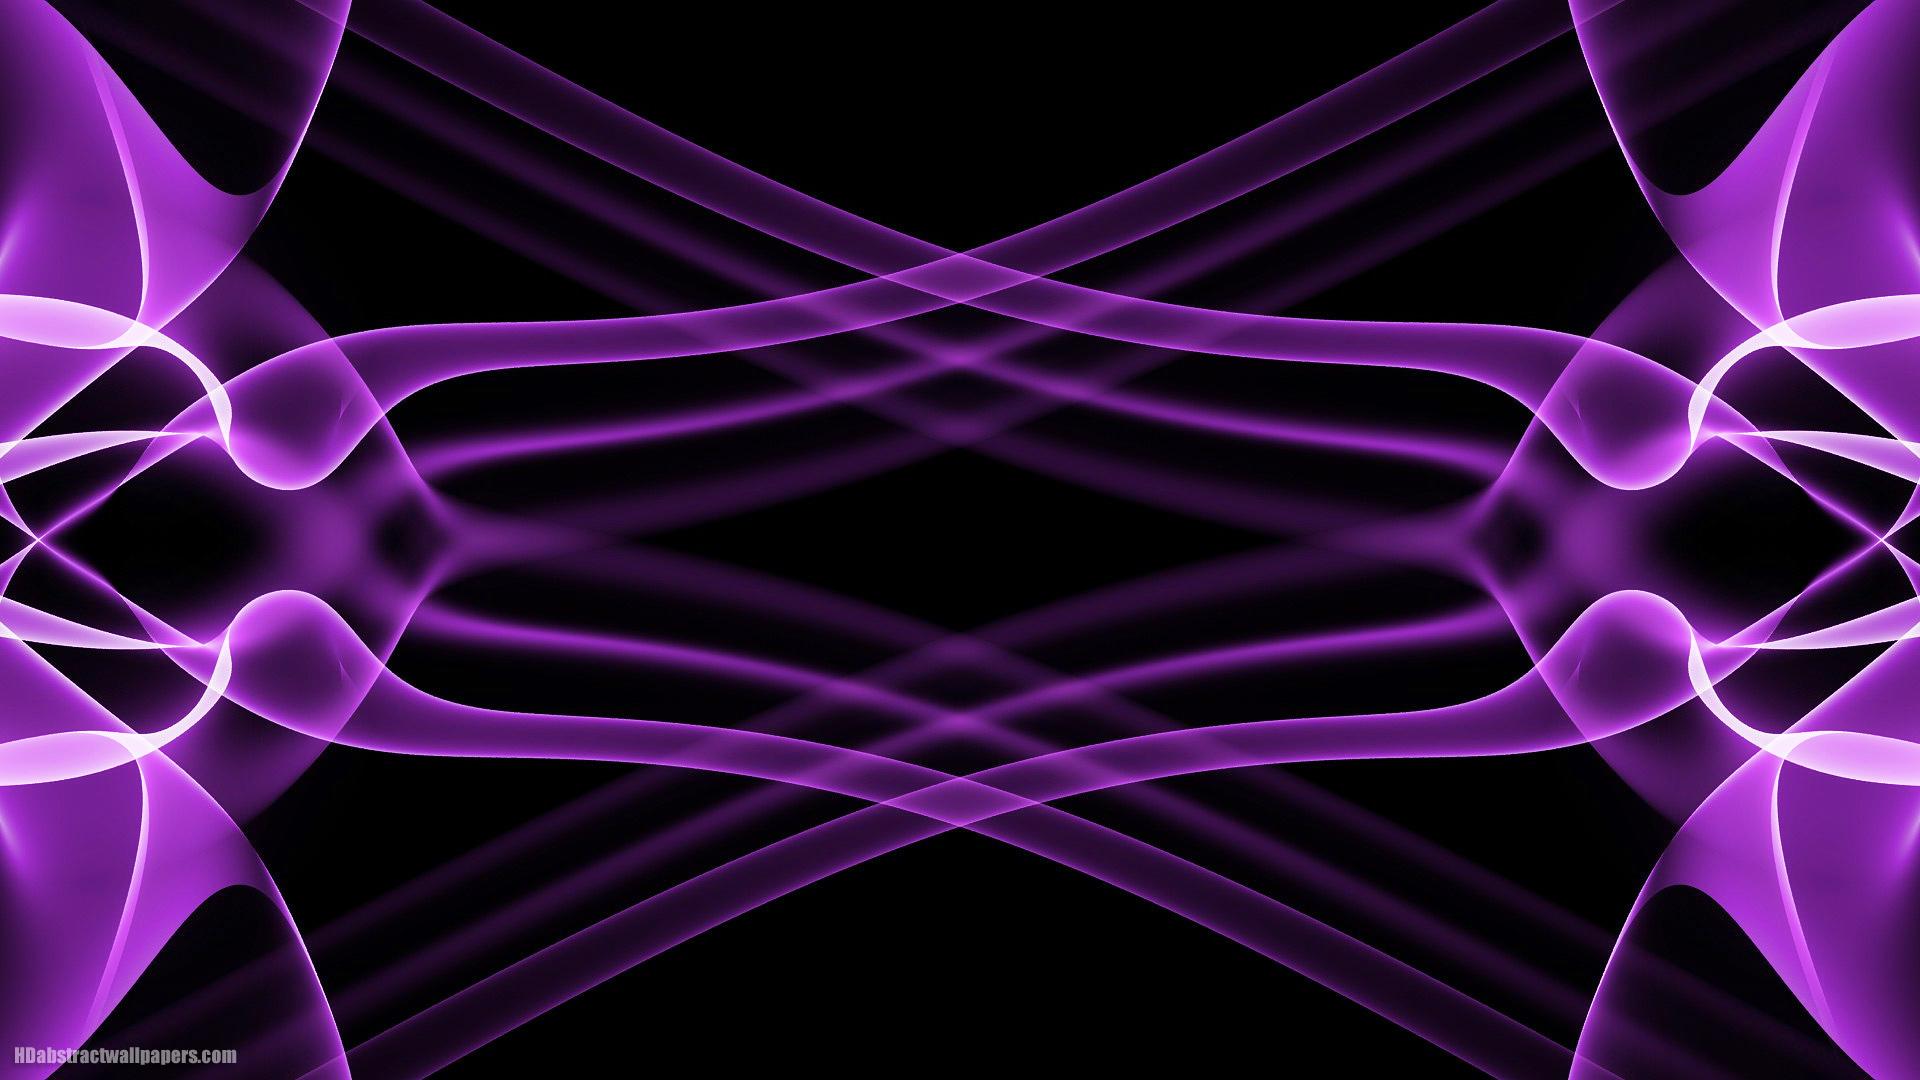 Free download Abstract purple wallpaper with black background HD